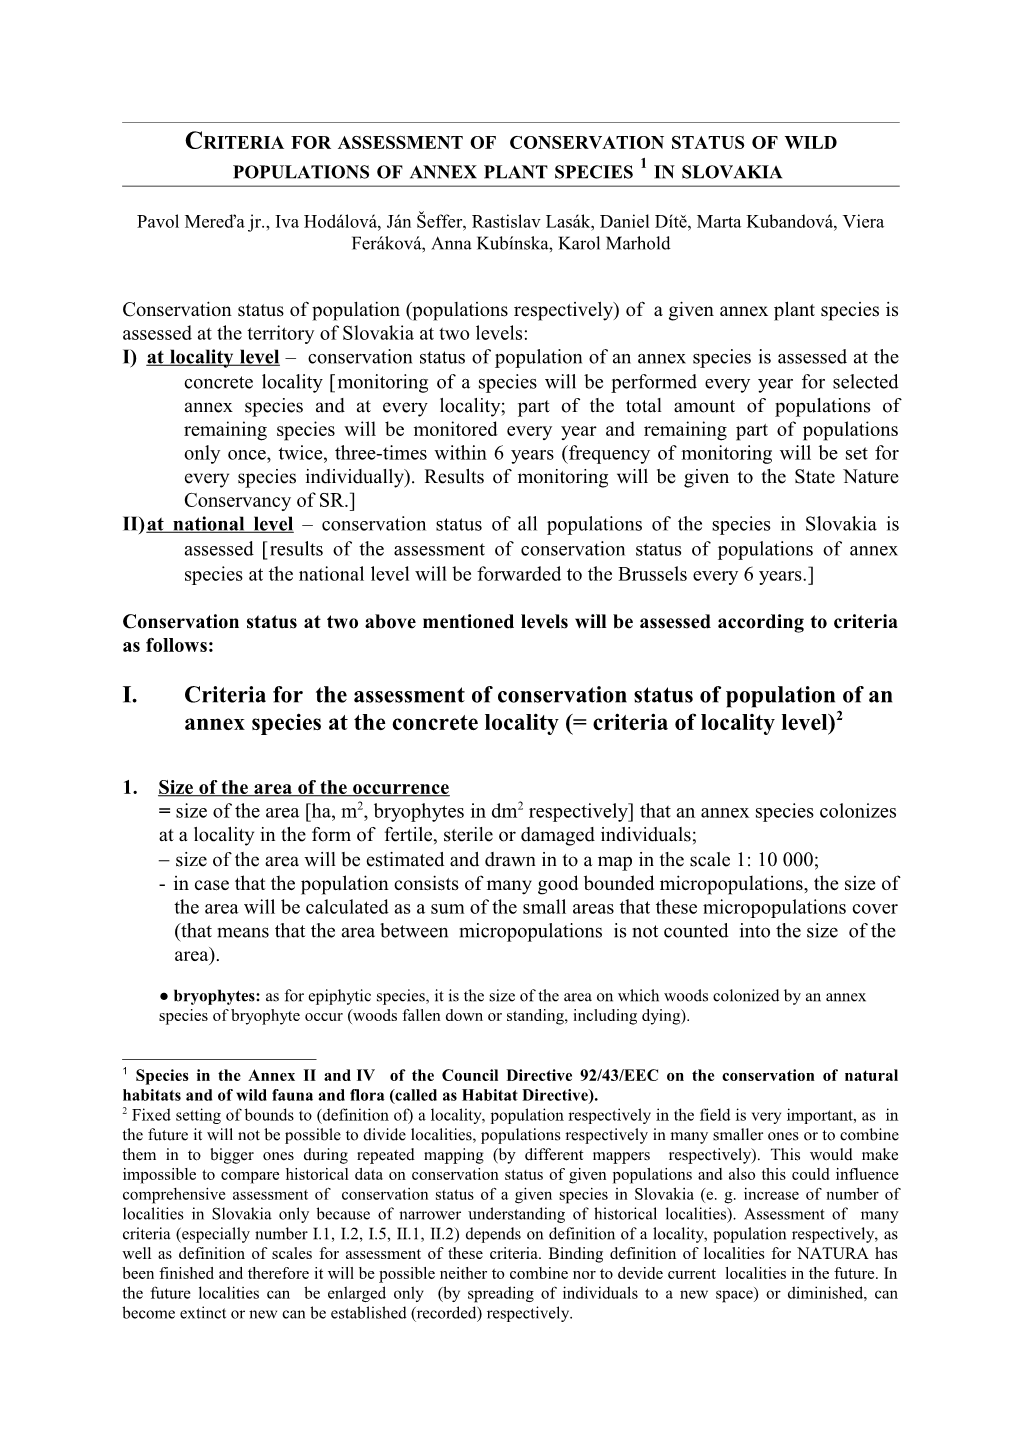 Criteria for Assessment of Conservation Status of Wild Populations of Annex Plant Species